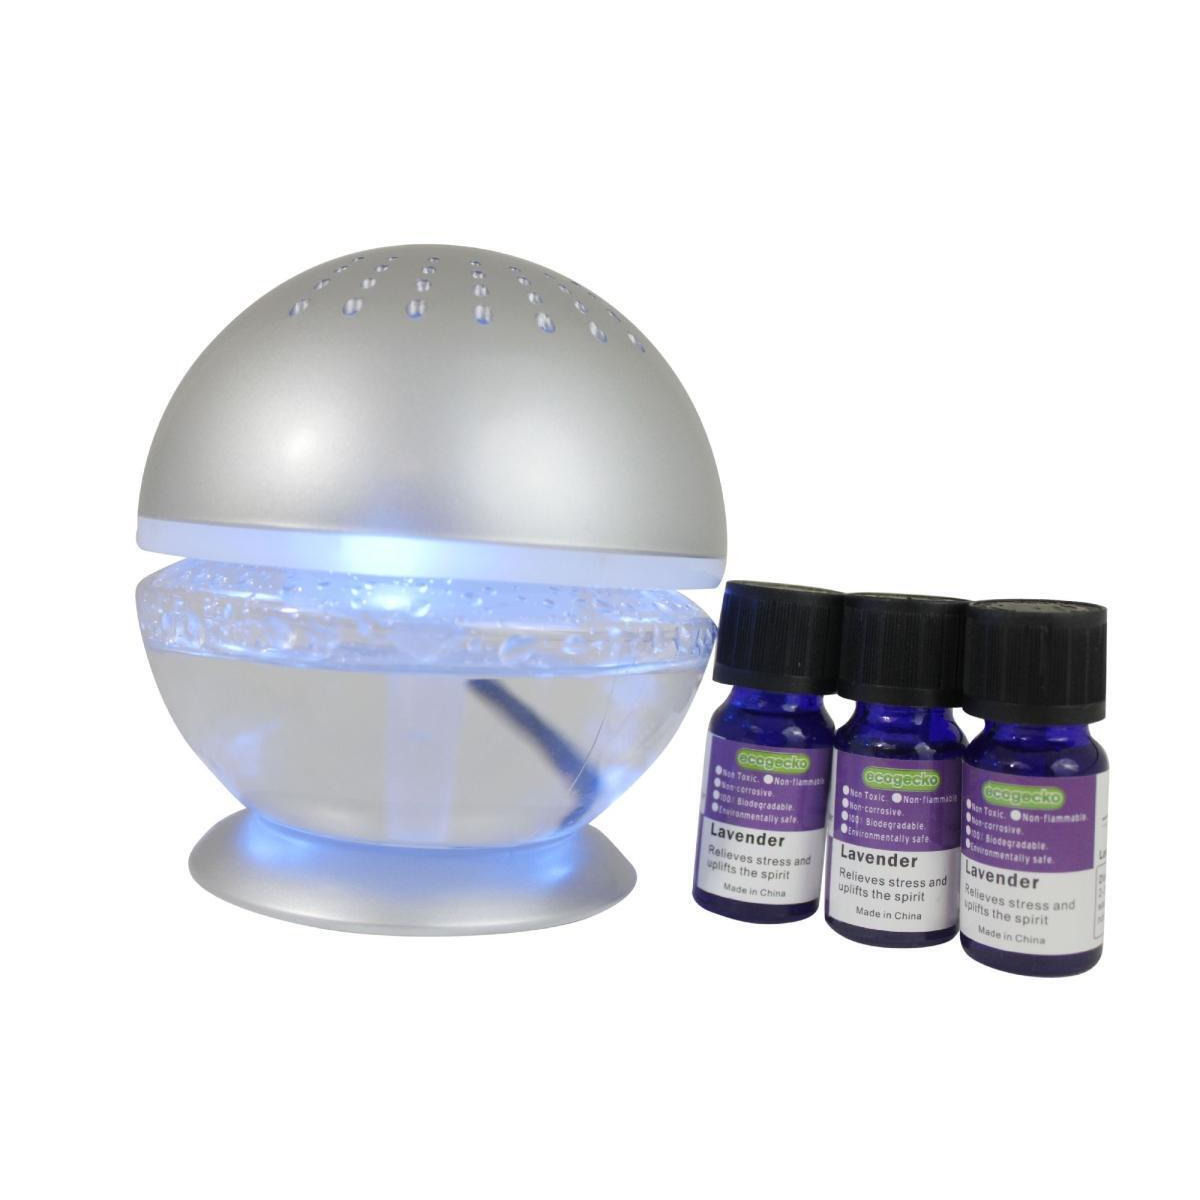 EcoGecko 75002-10ML-3PACK-75518-Silver 10 ml Little Squirt Silver Glowing Wate Air Revitalizer Air Washer Aromatherapy Essential Oil Diffuser with 3 Bottles of Lavender Oil, Silver - Pack of 3